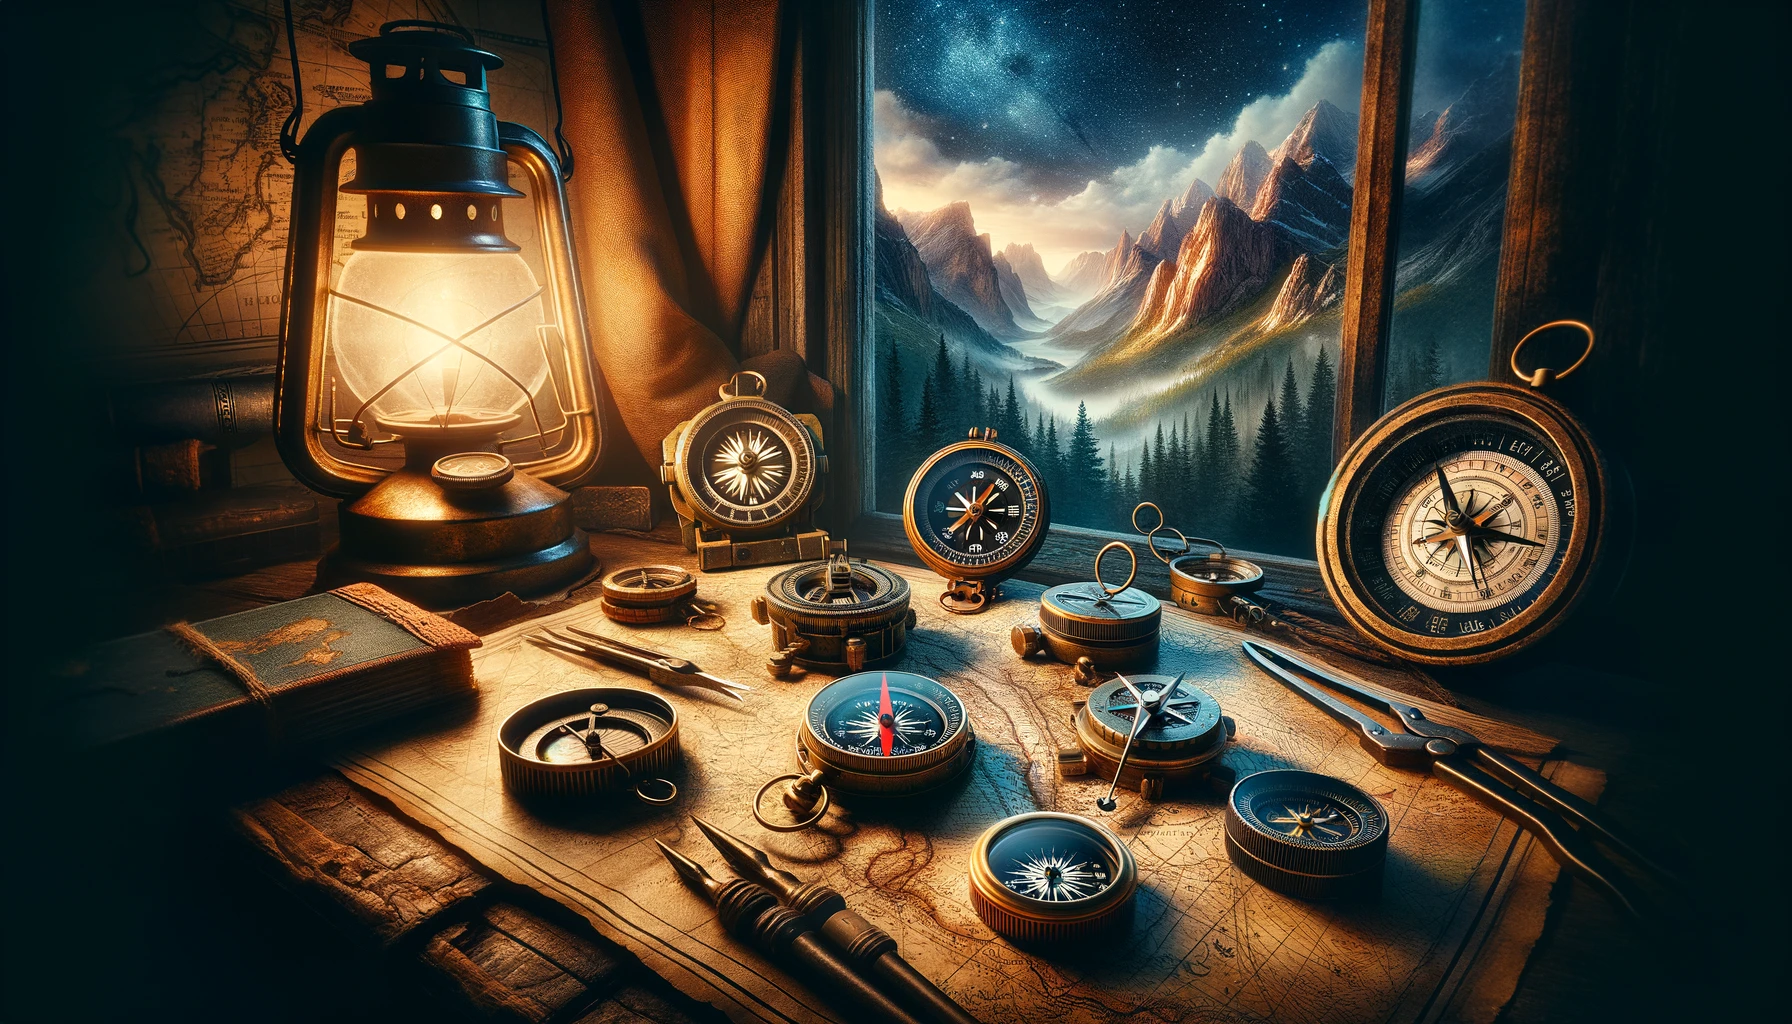 Variety of compass types on an ancient map, illuminated by a vintage lantern, with a dramatic landscape visible through a window, showcasing the adventure spirit and the importance of choosing the right navigation tool